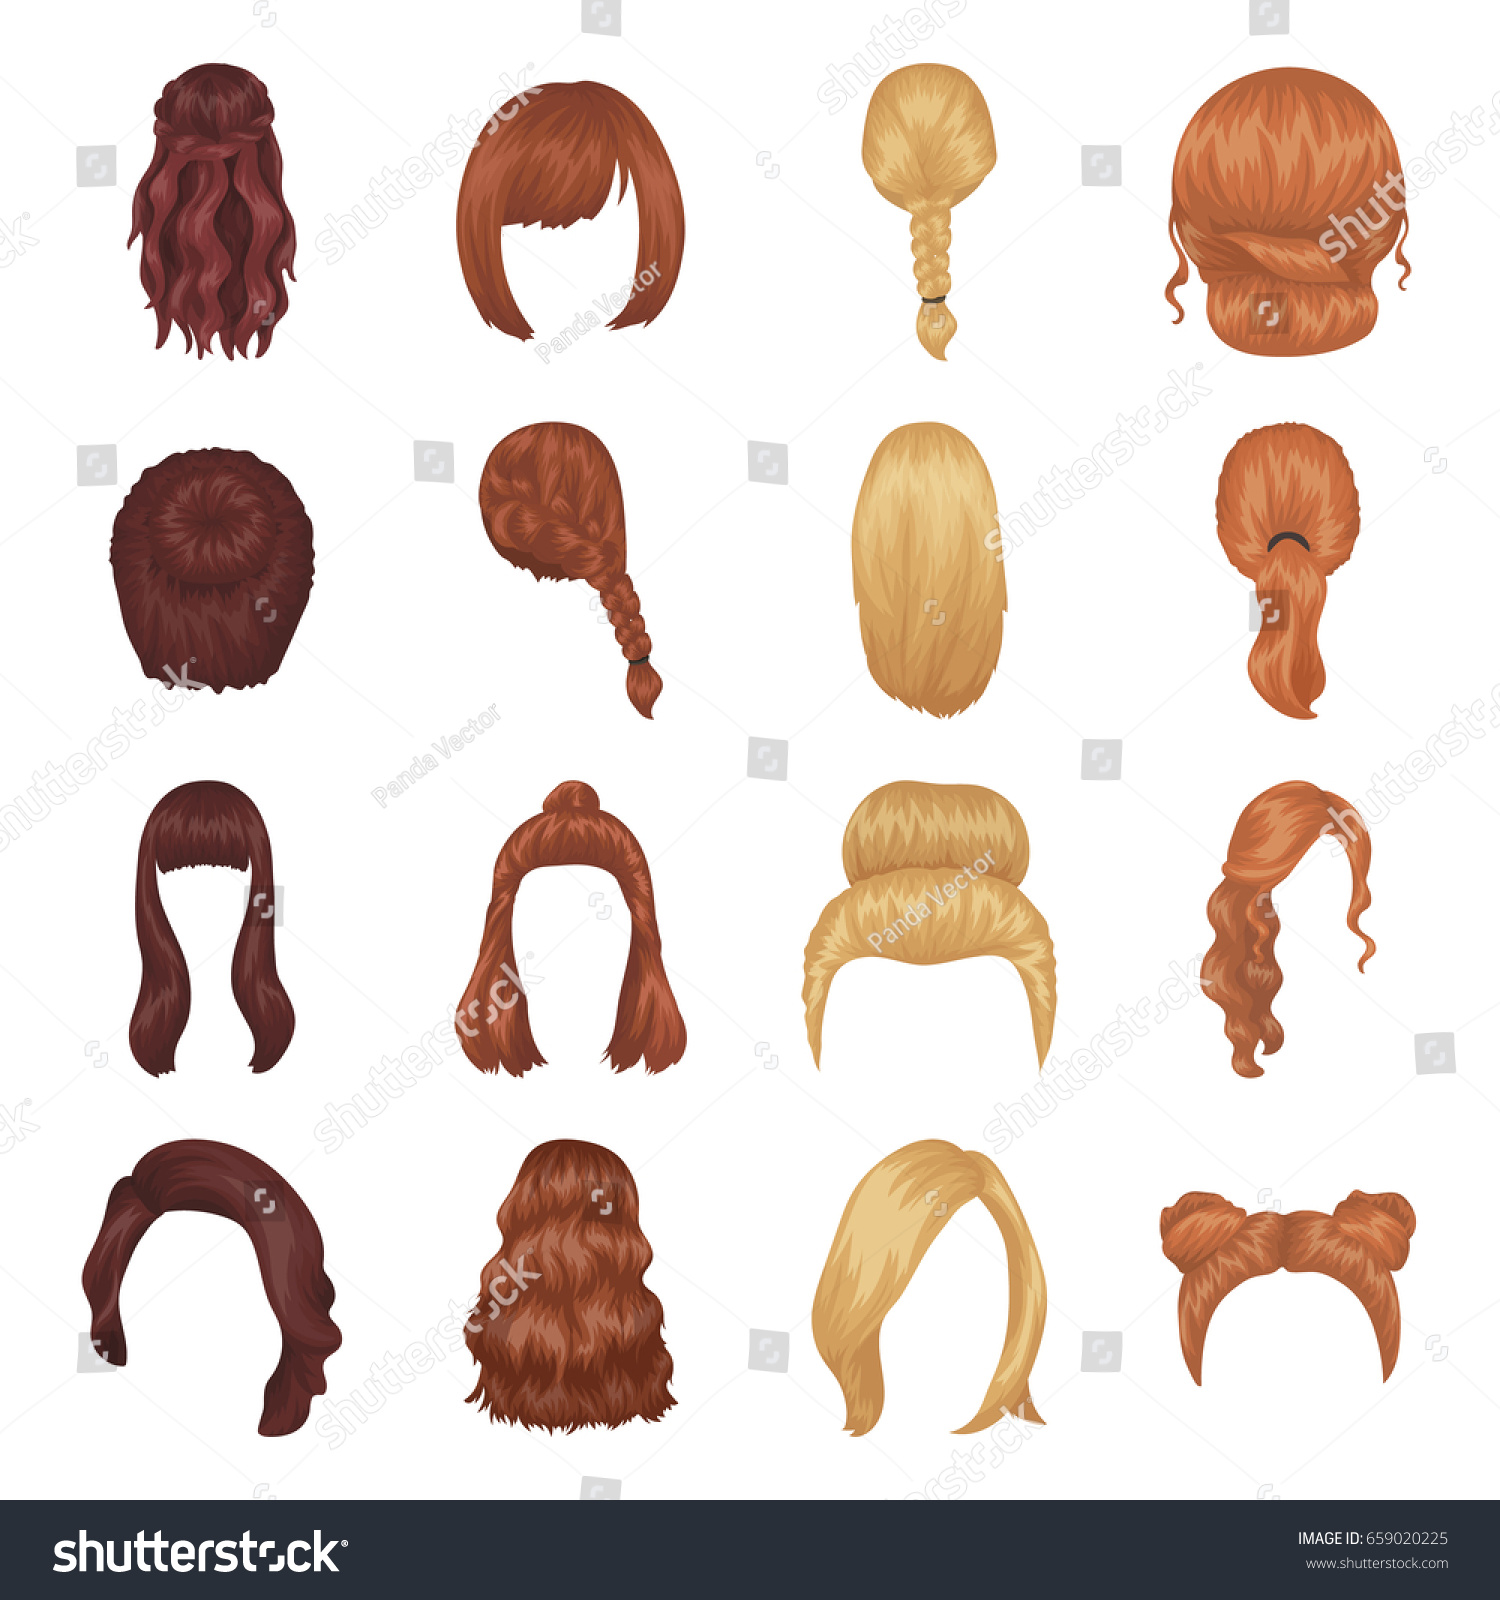 Quads Blond Braids Other Types Hairstyles Stock Vector 